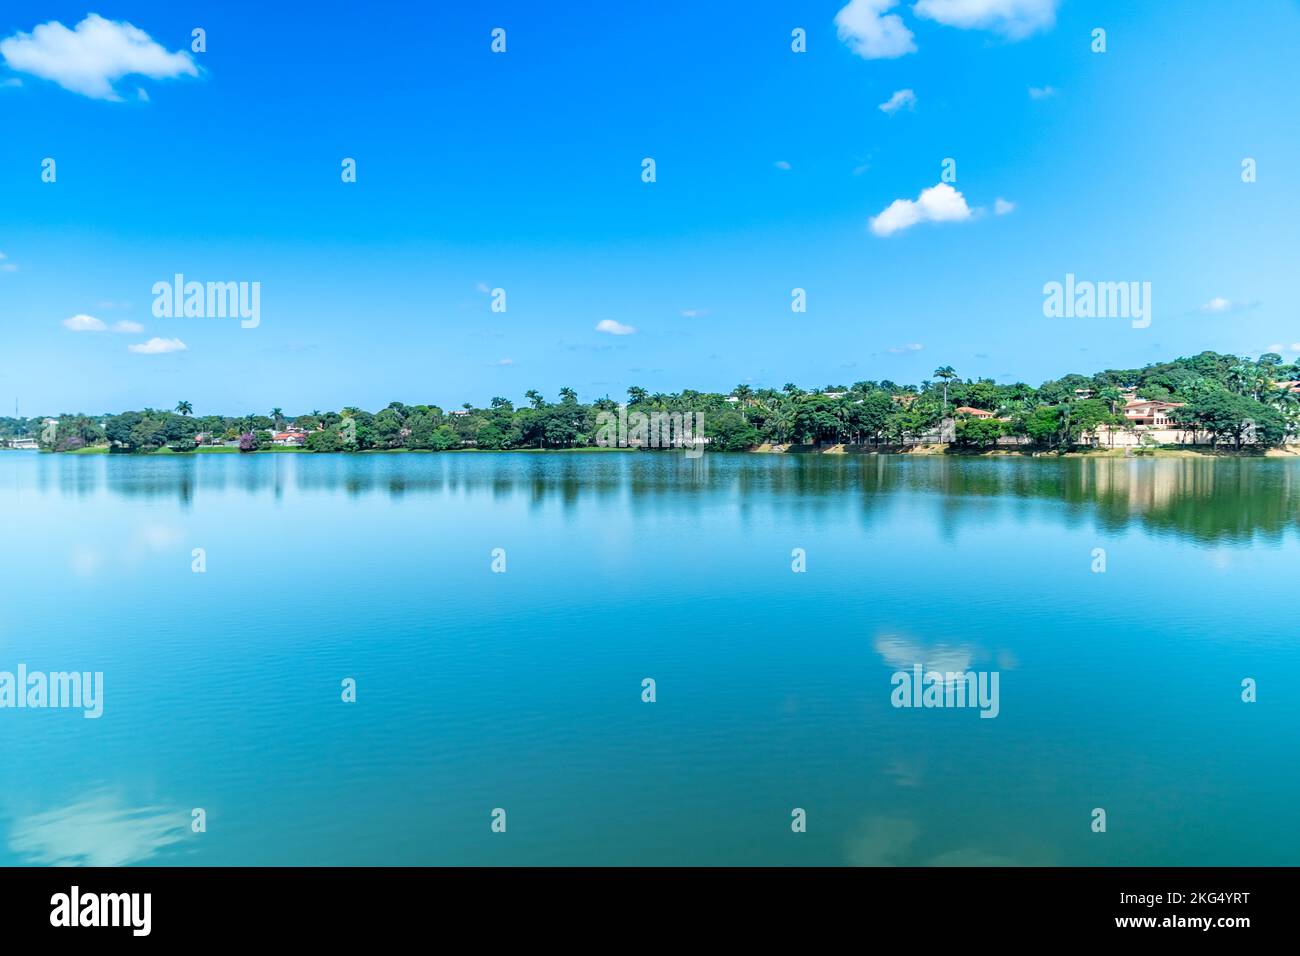 View from the river to the town of Bela Horizonte Stock Photo